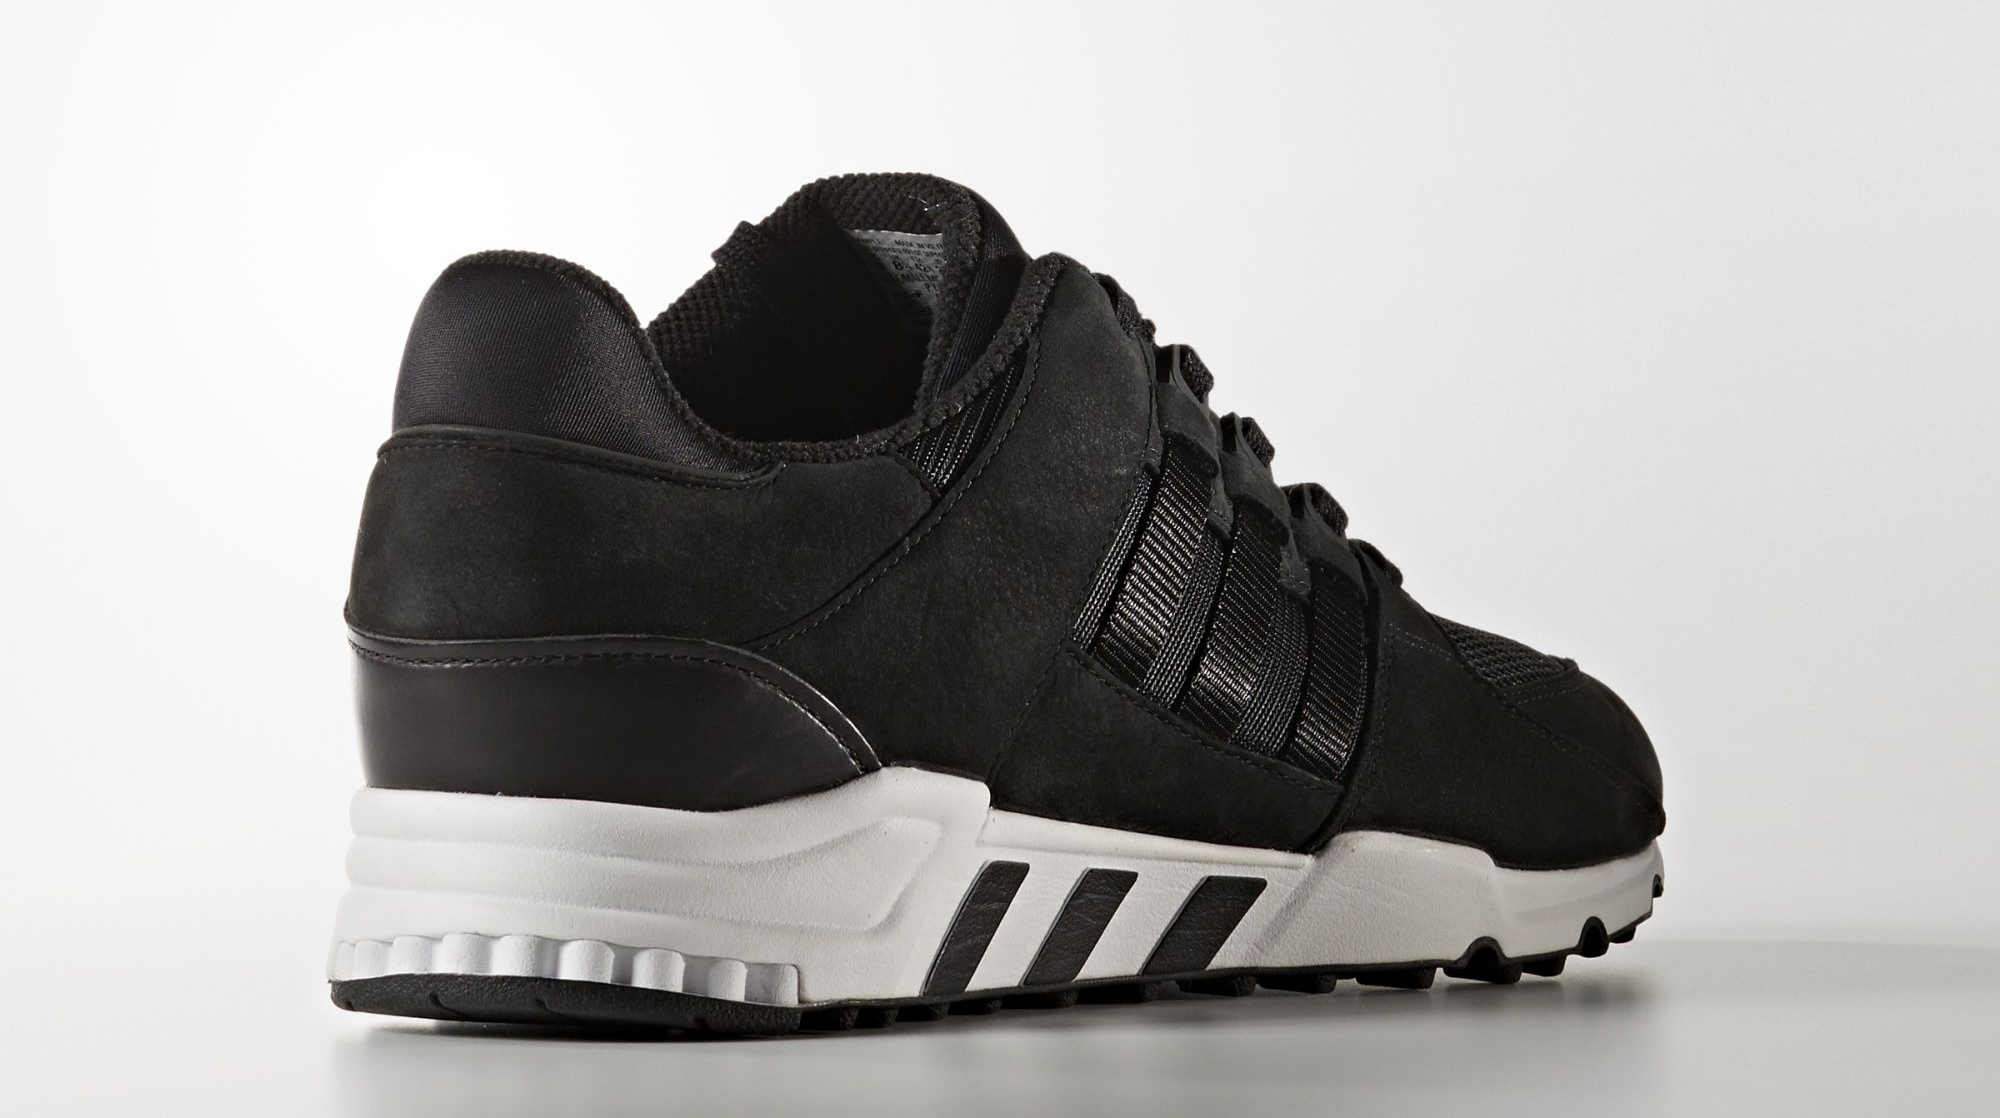 adidas-eqt-support-rf-milled-leather-pack-1